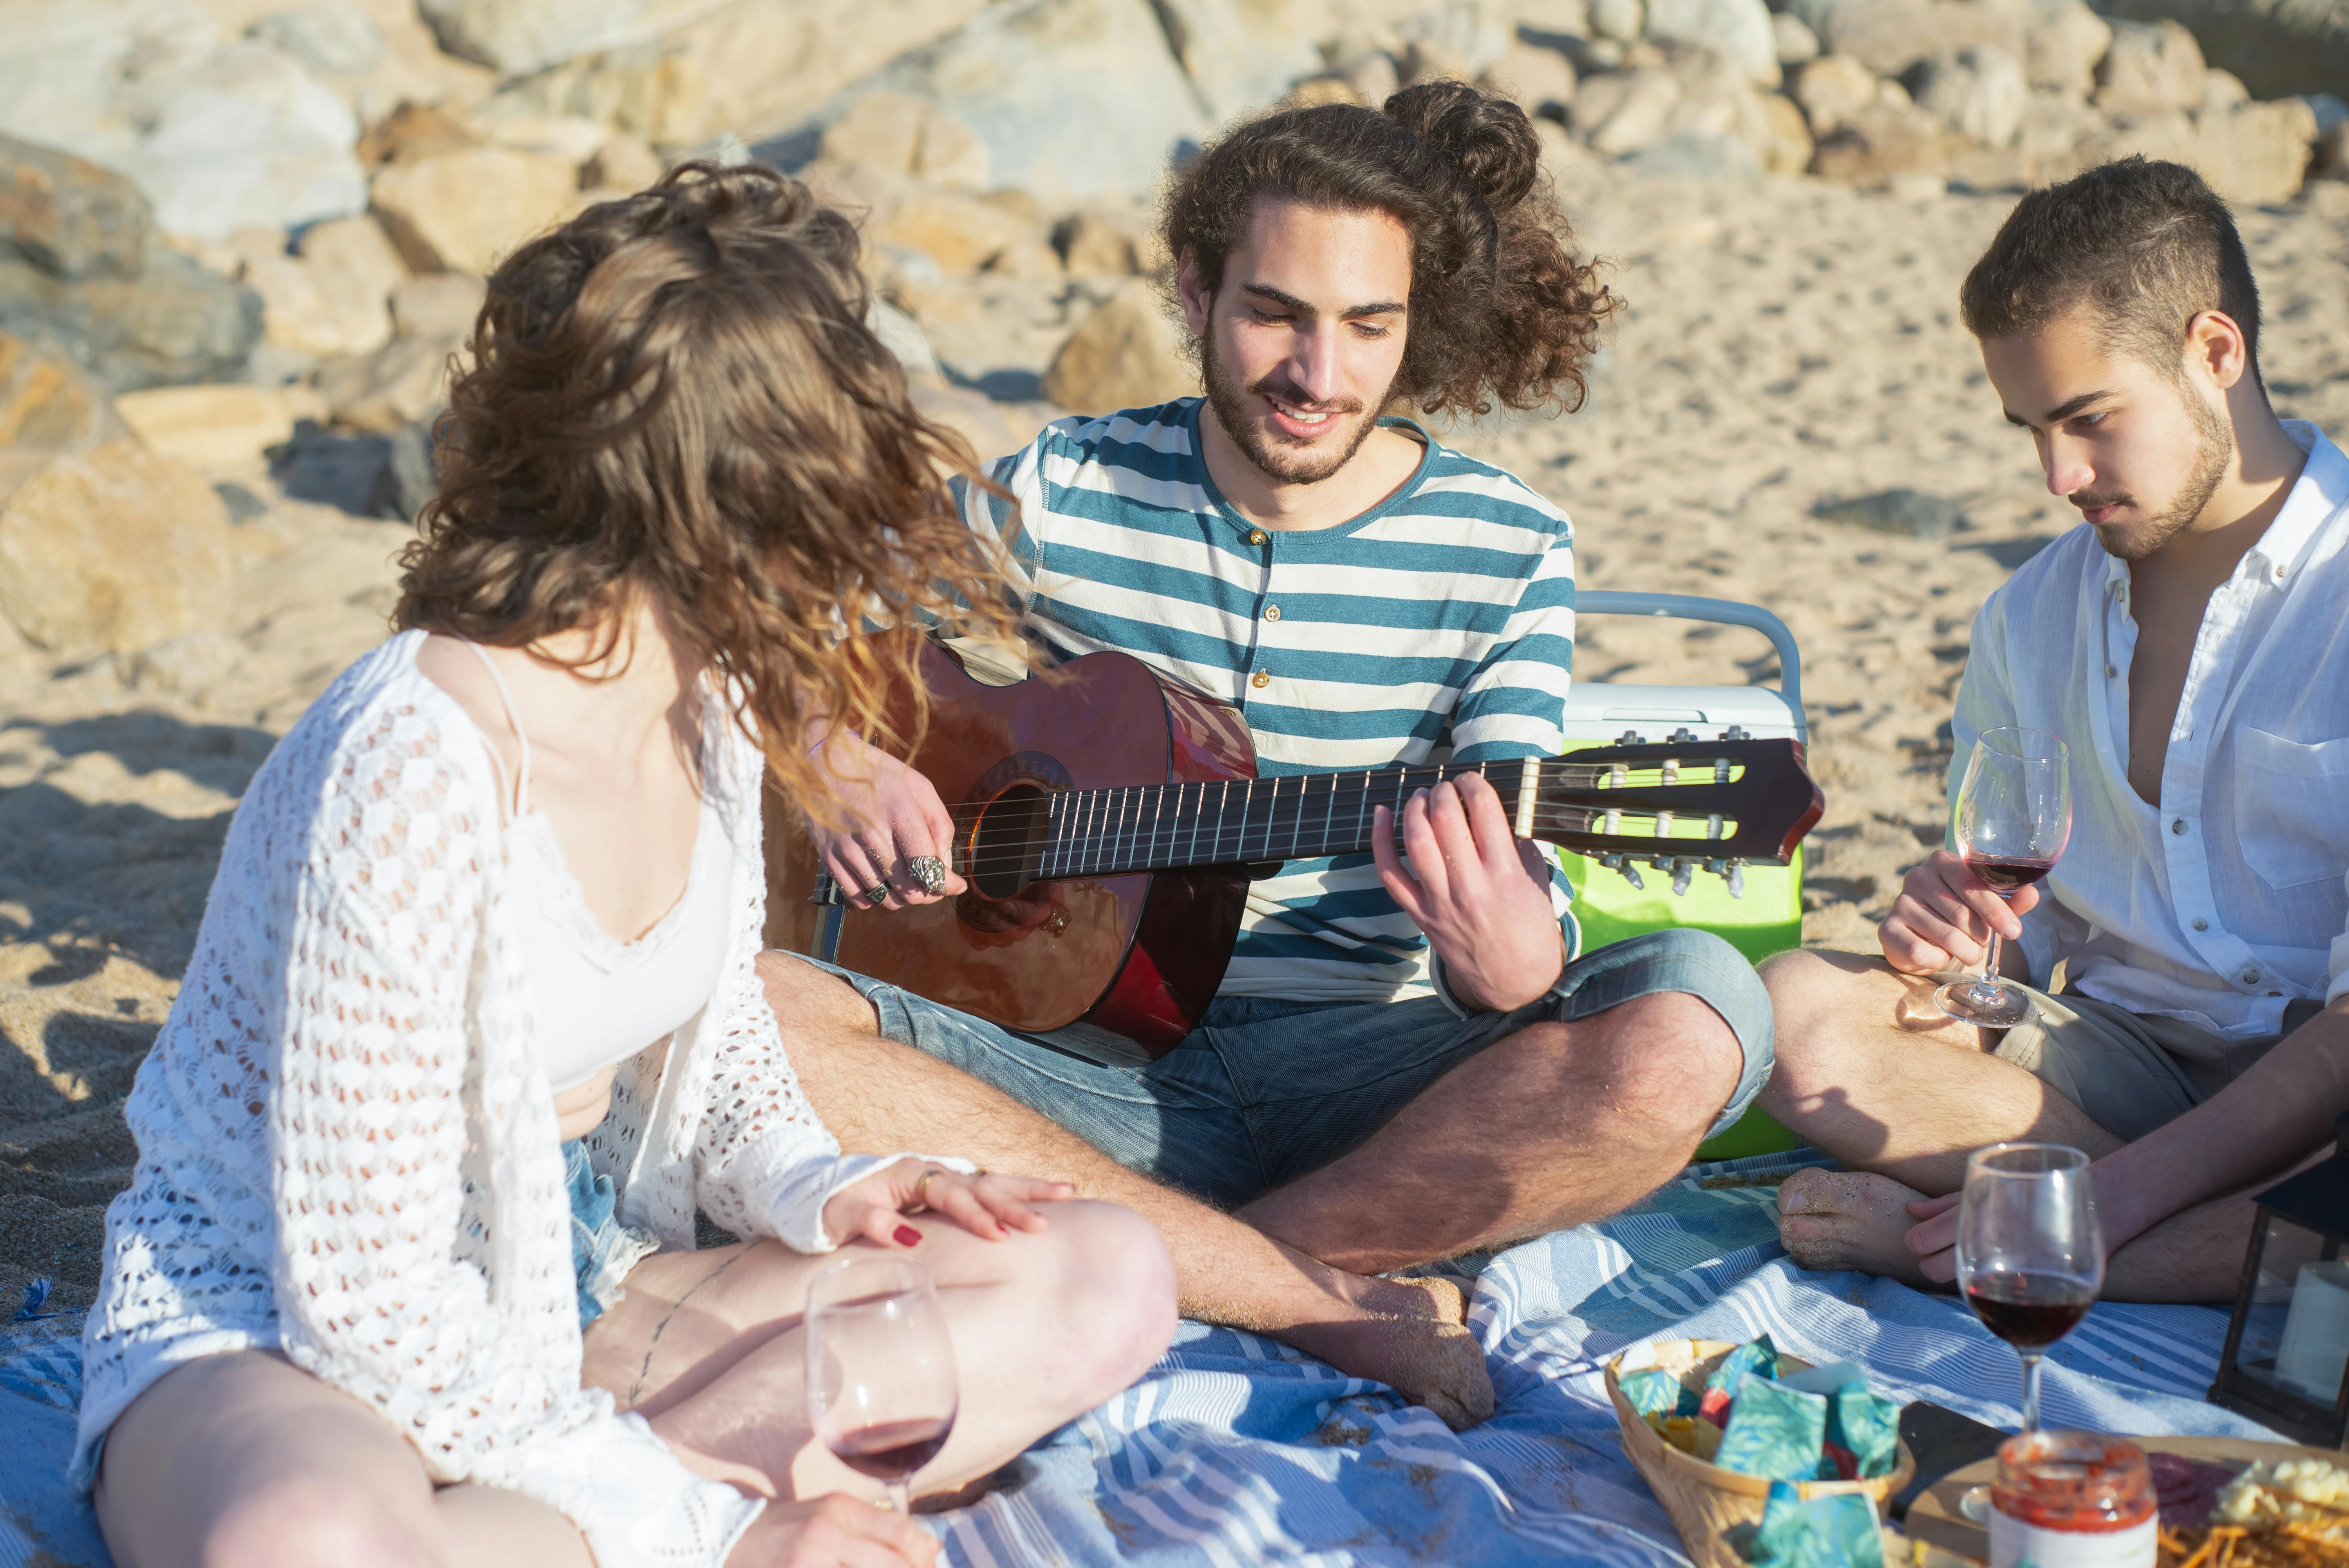 a man playing guitar with his friends while sitting on a picnic blanket